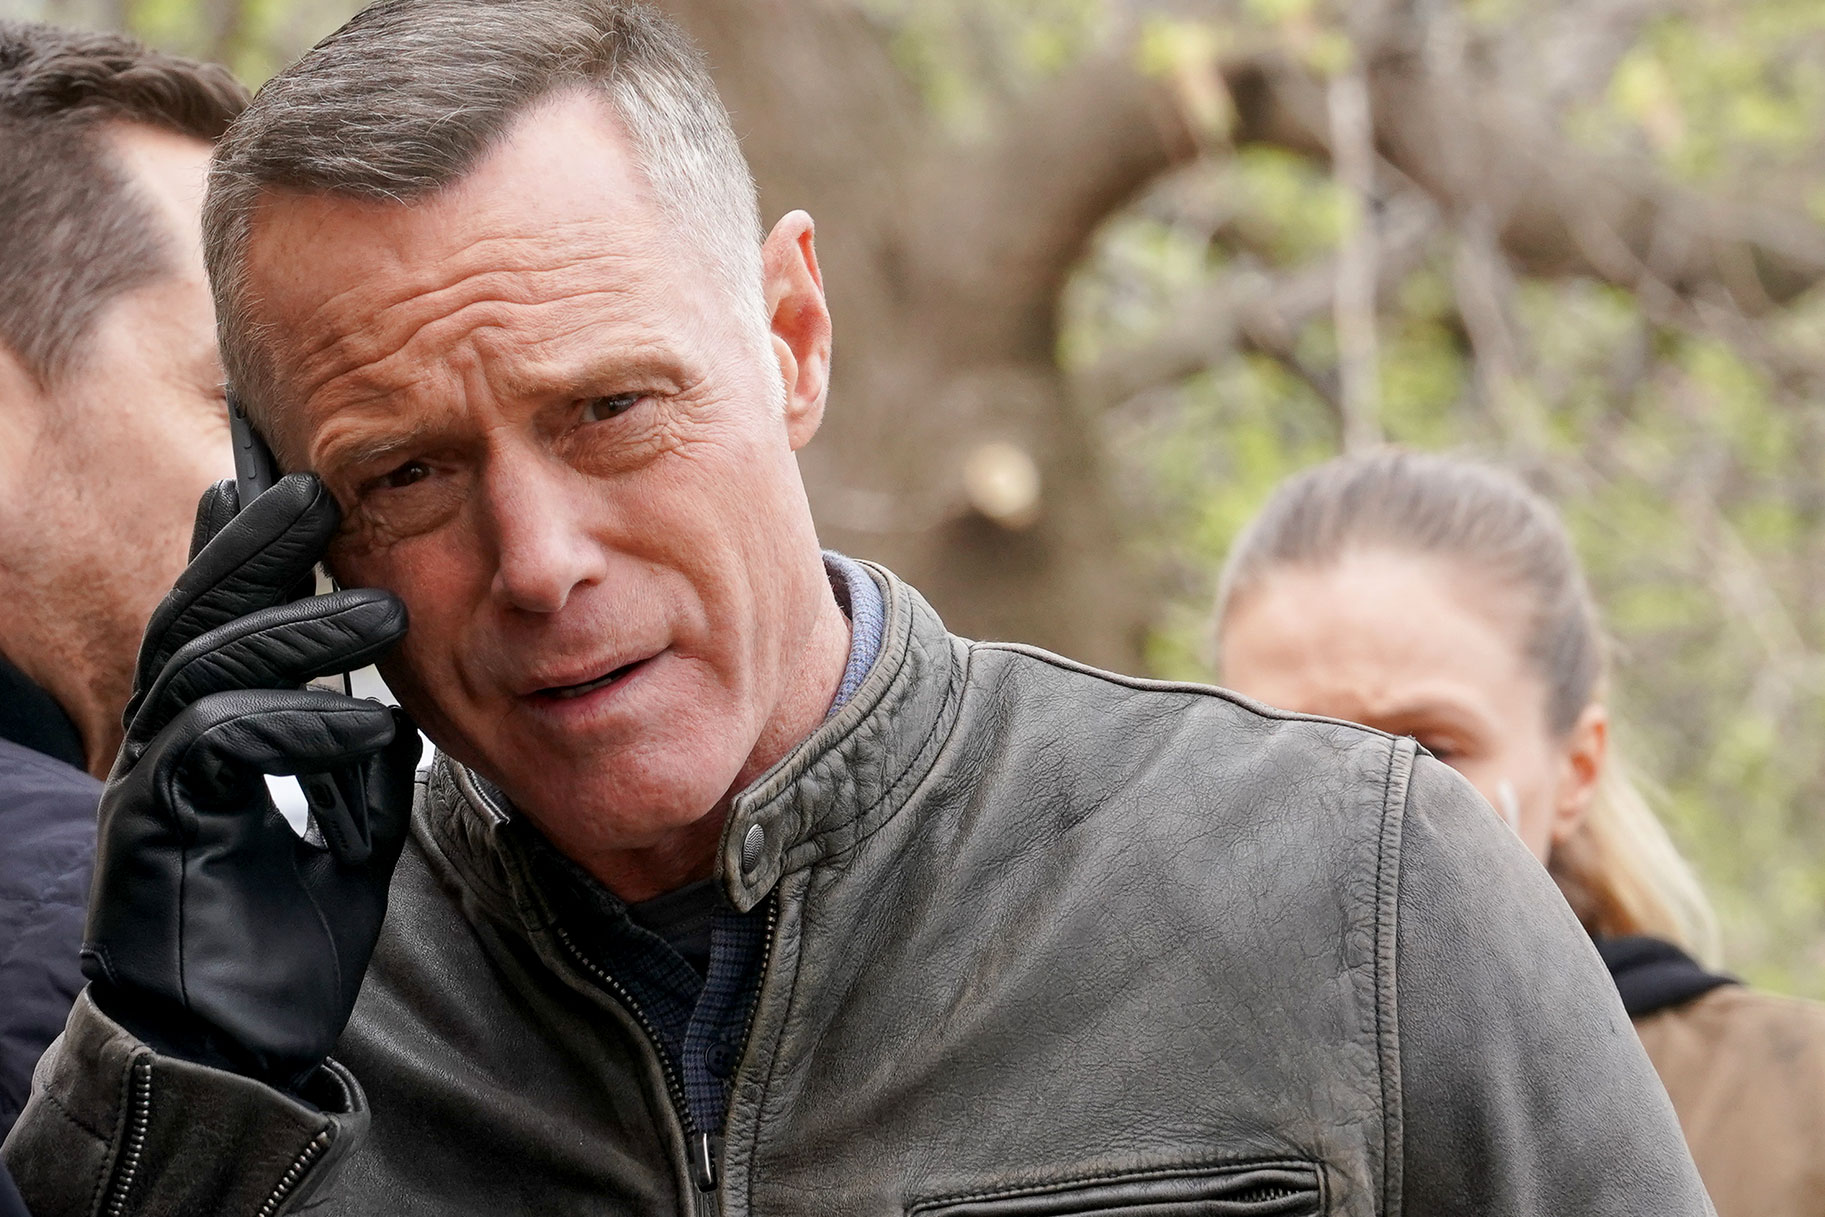 Jason Beghe speaking on a cell phone